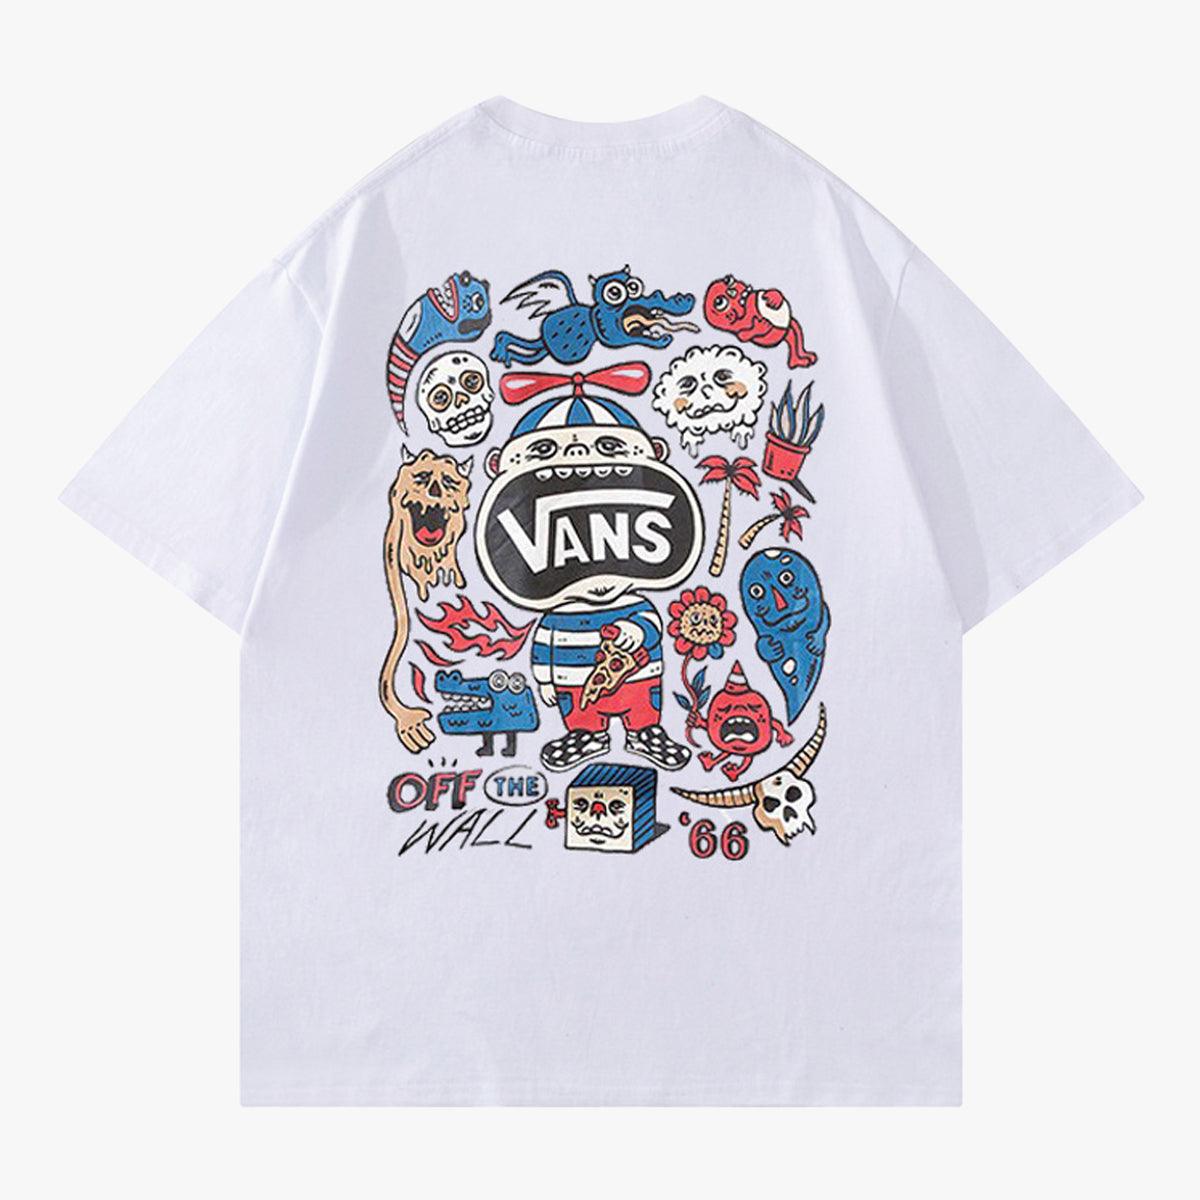 Vans 66 Good Things Trippy T-Shirt - Aesthetic Clothes Shop